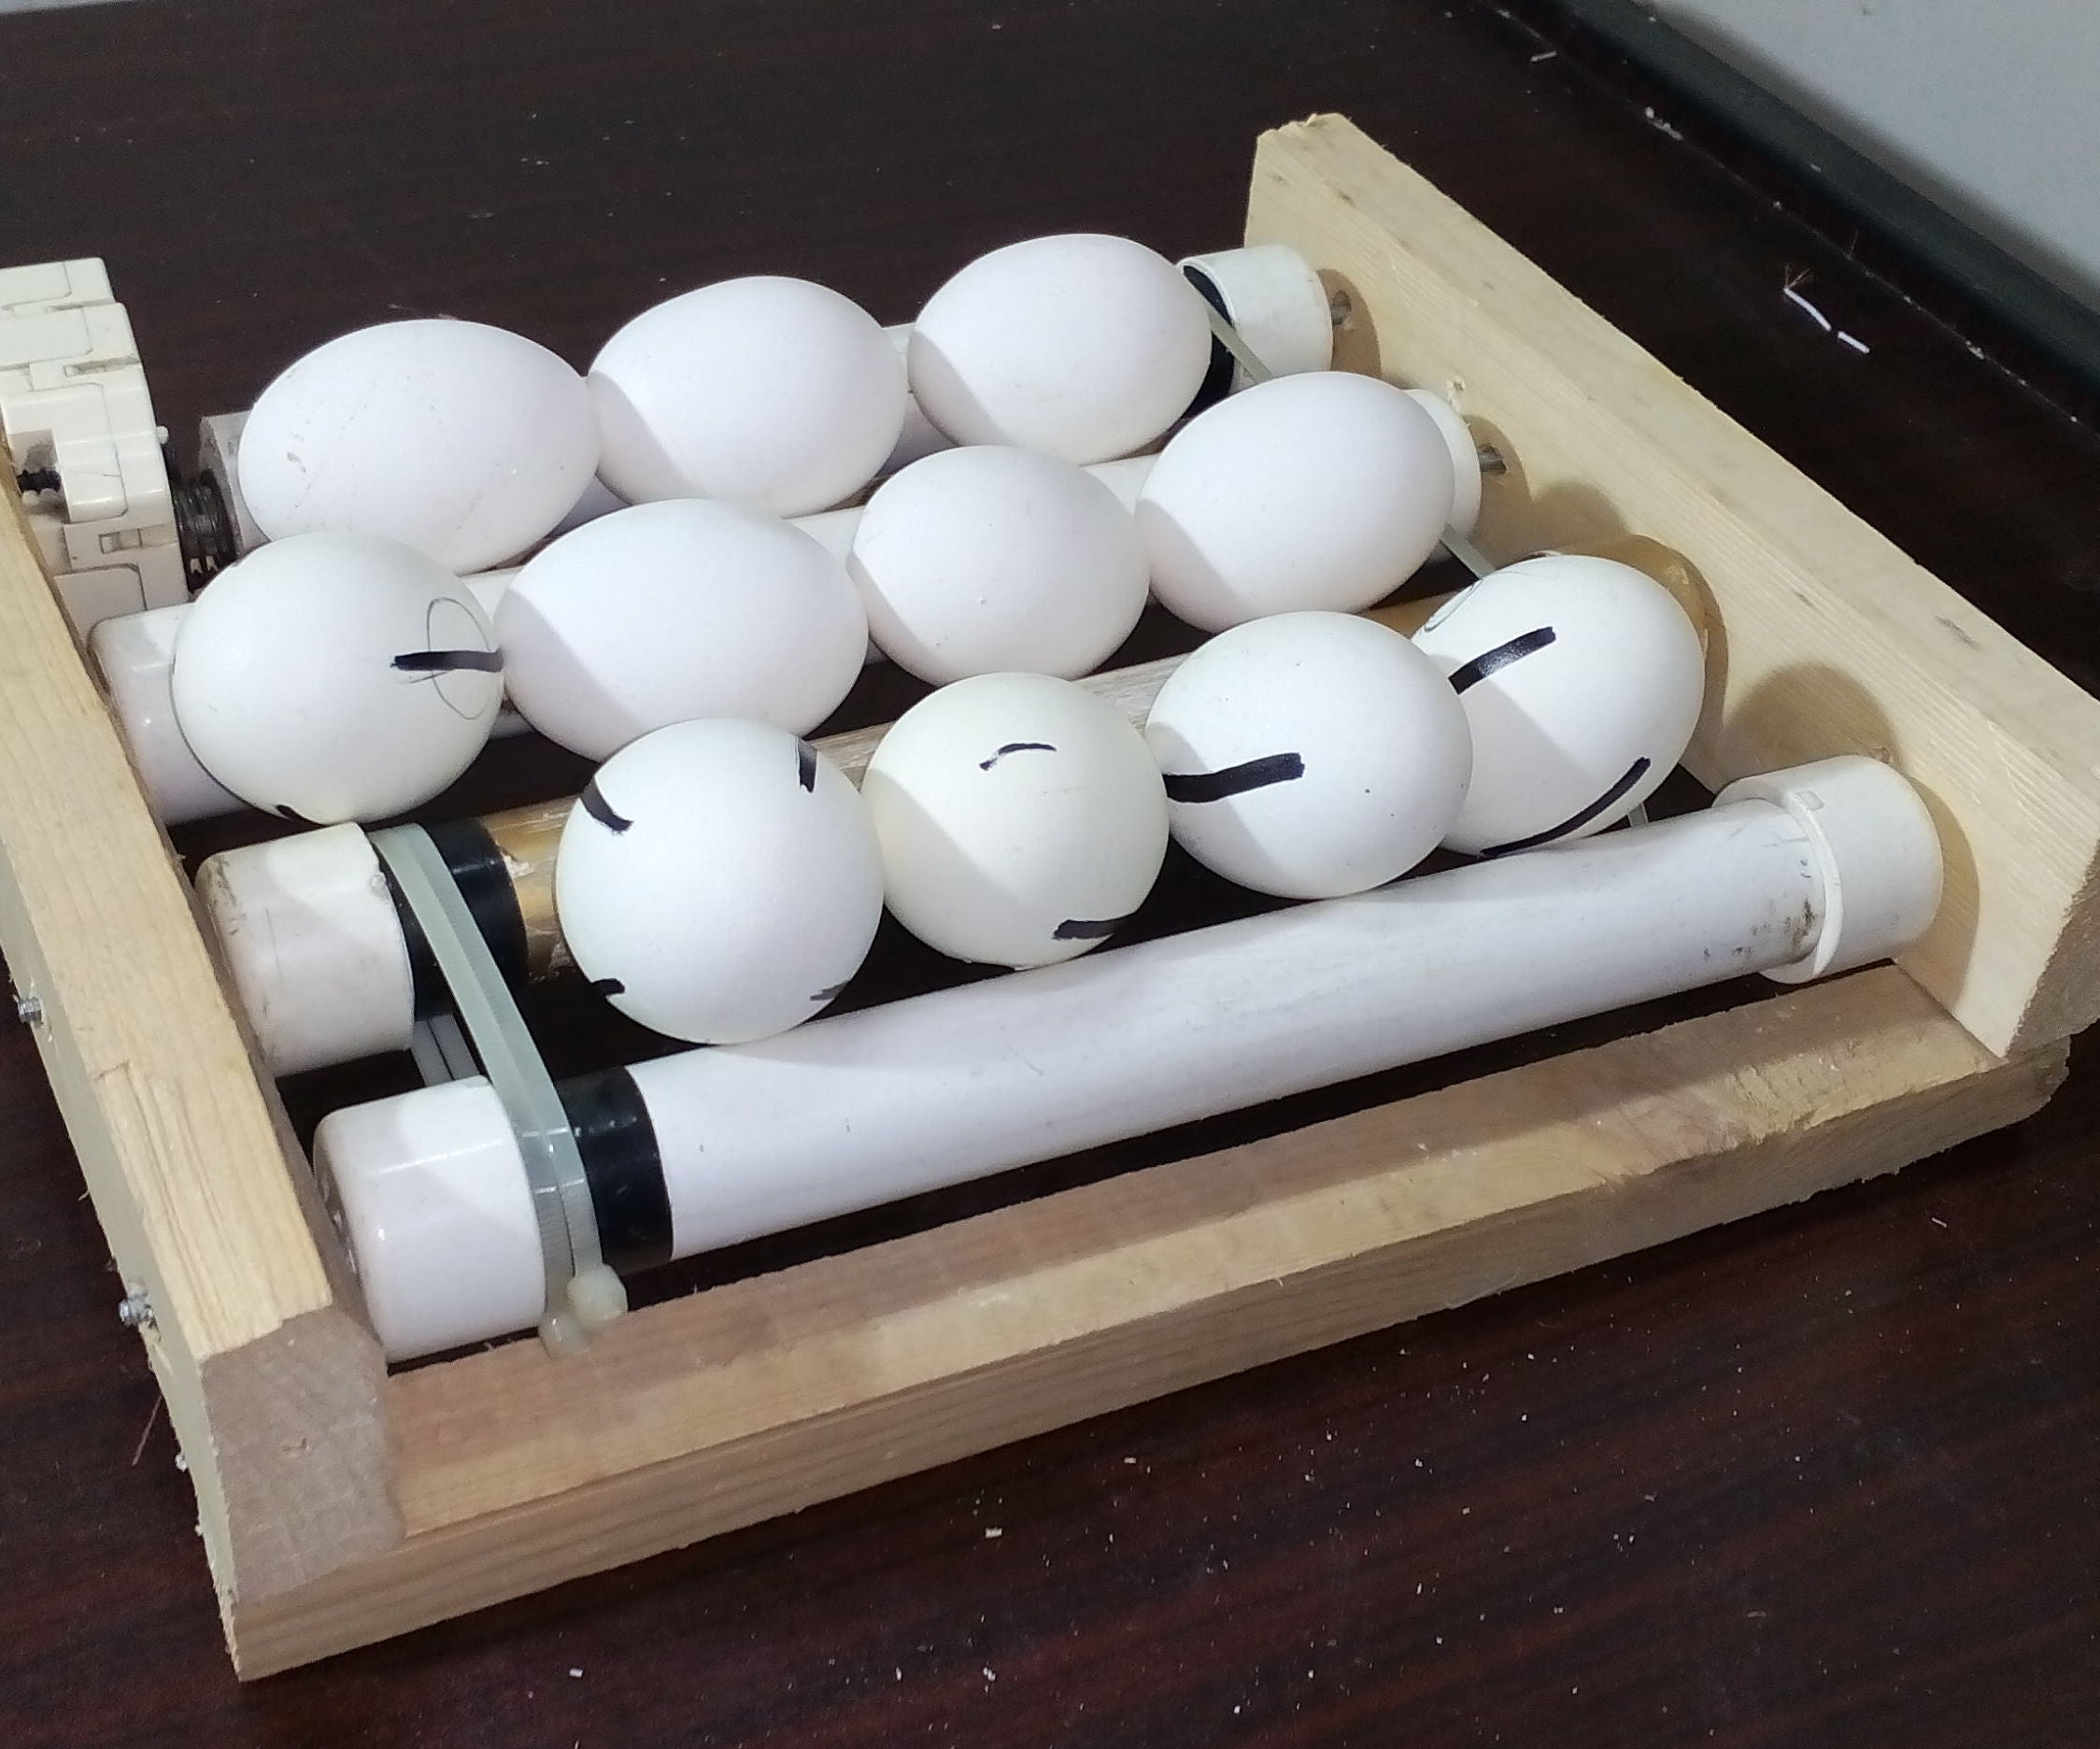 How to Make Automatic Rotating Egg Tray From PVC and Wood